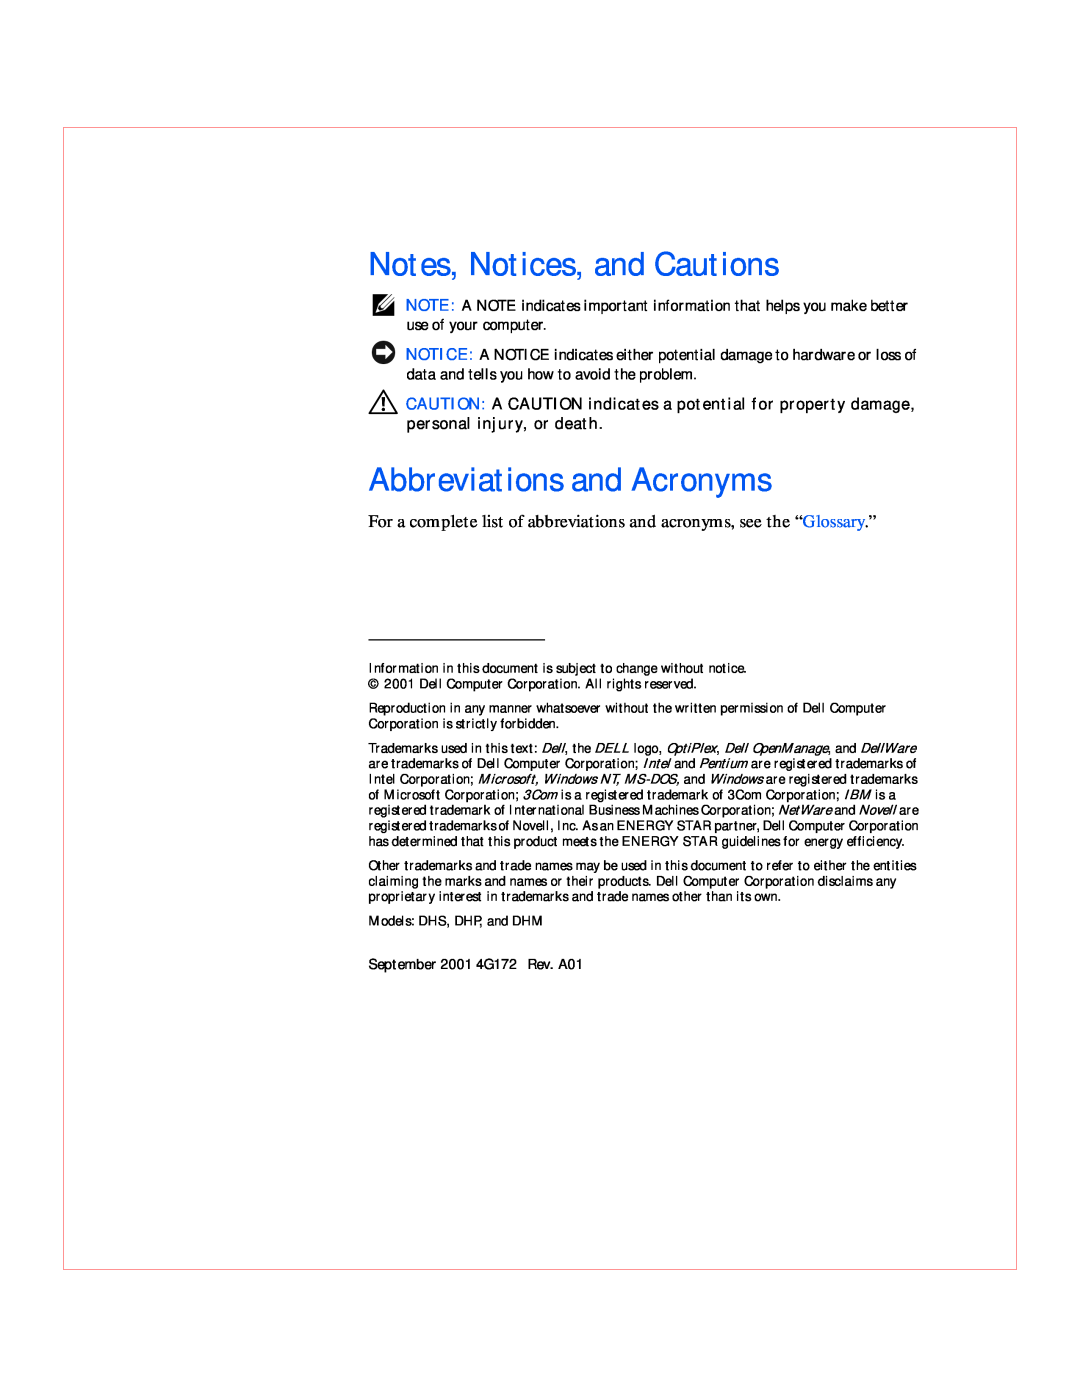 Dell GX240 manual Notes, Notices, and Cautions, Abbreviations and Acronyms, ____________________ 